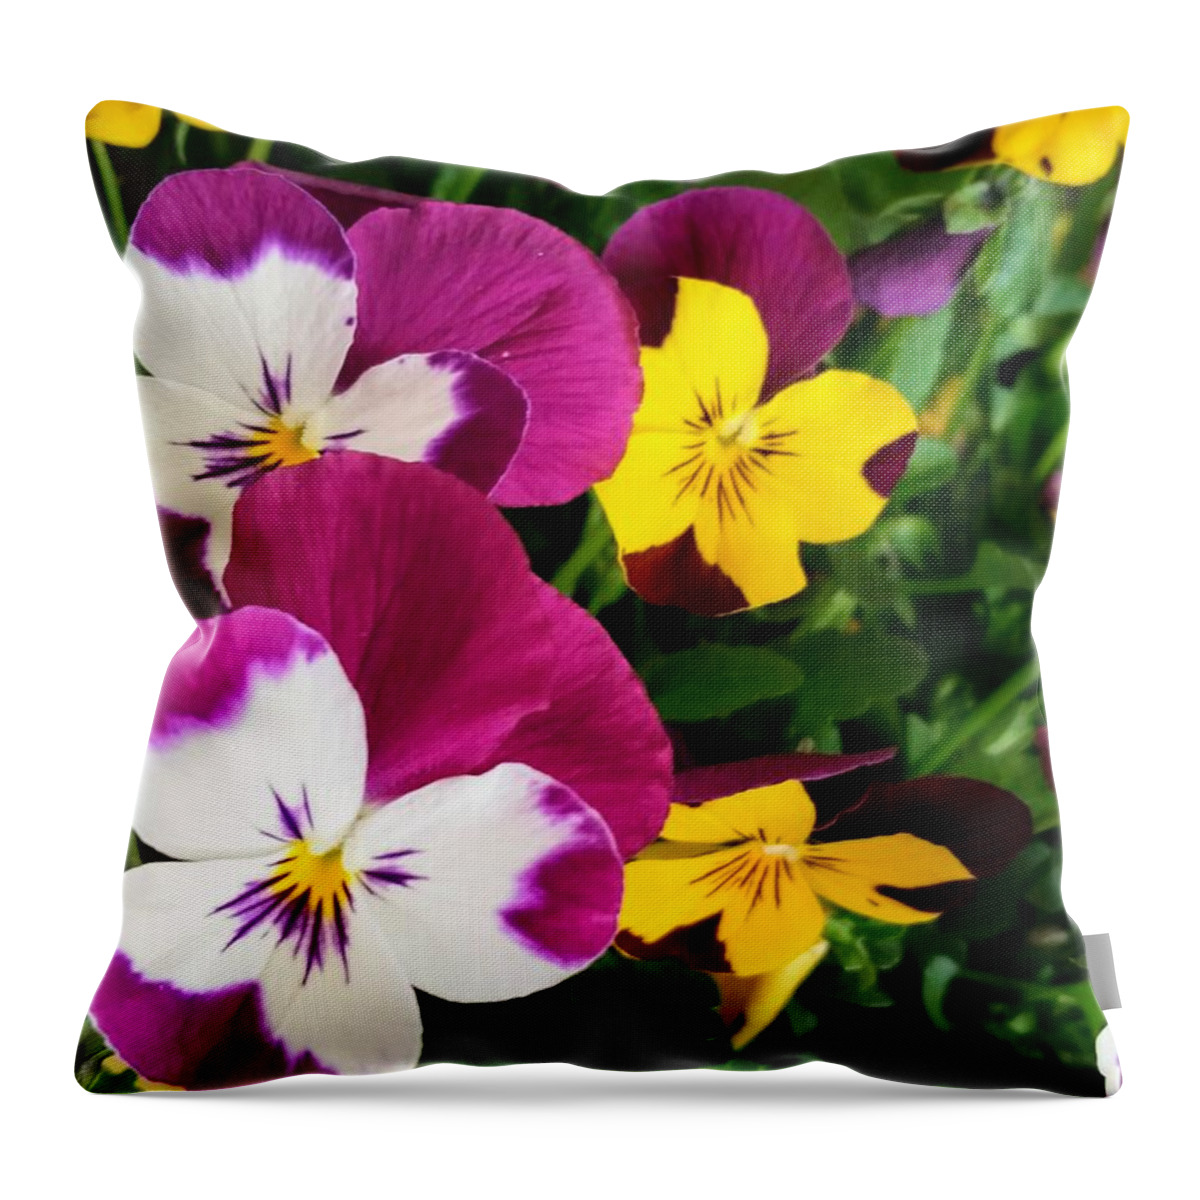 Flowers Throw Pillow featuring the photograph Pansies by Valerie Josi